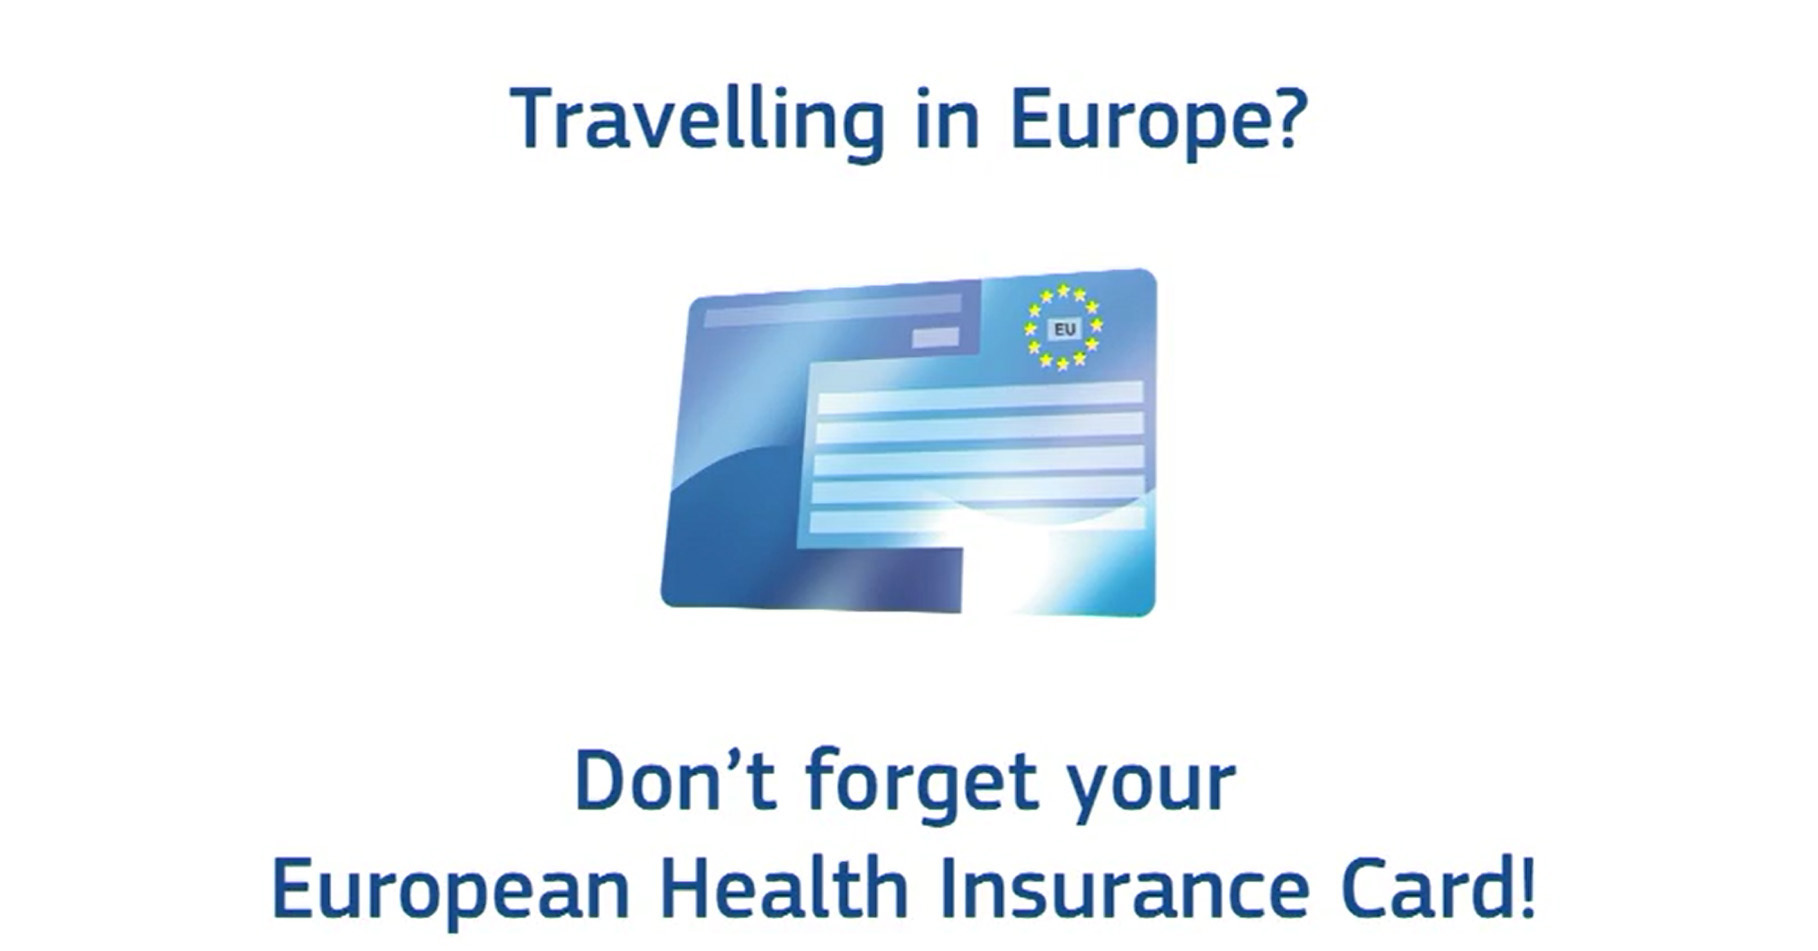 Travelling in Europe? Don't forget your European Health Insurance Card